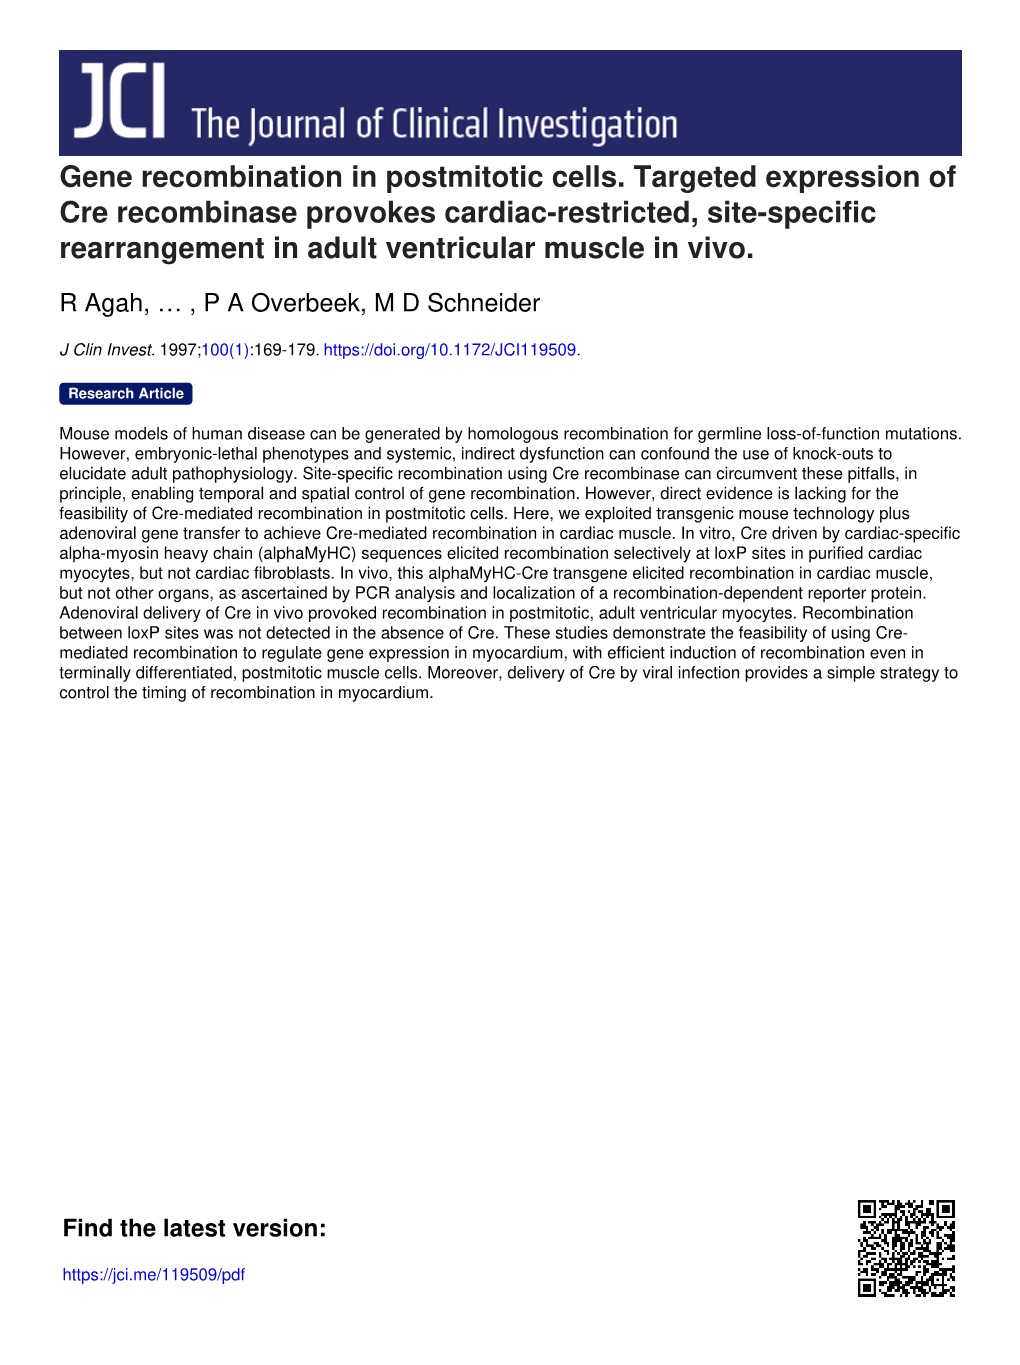 Gene Recombination in Postmitotic Cells. Targeted Expression of Cre Recombinase Provokes Cardiac-Restricted, Site-Specific Rearr